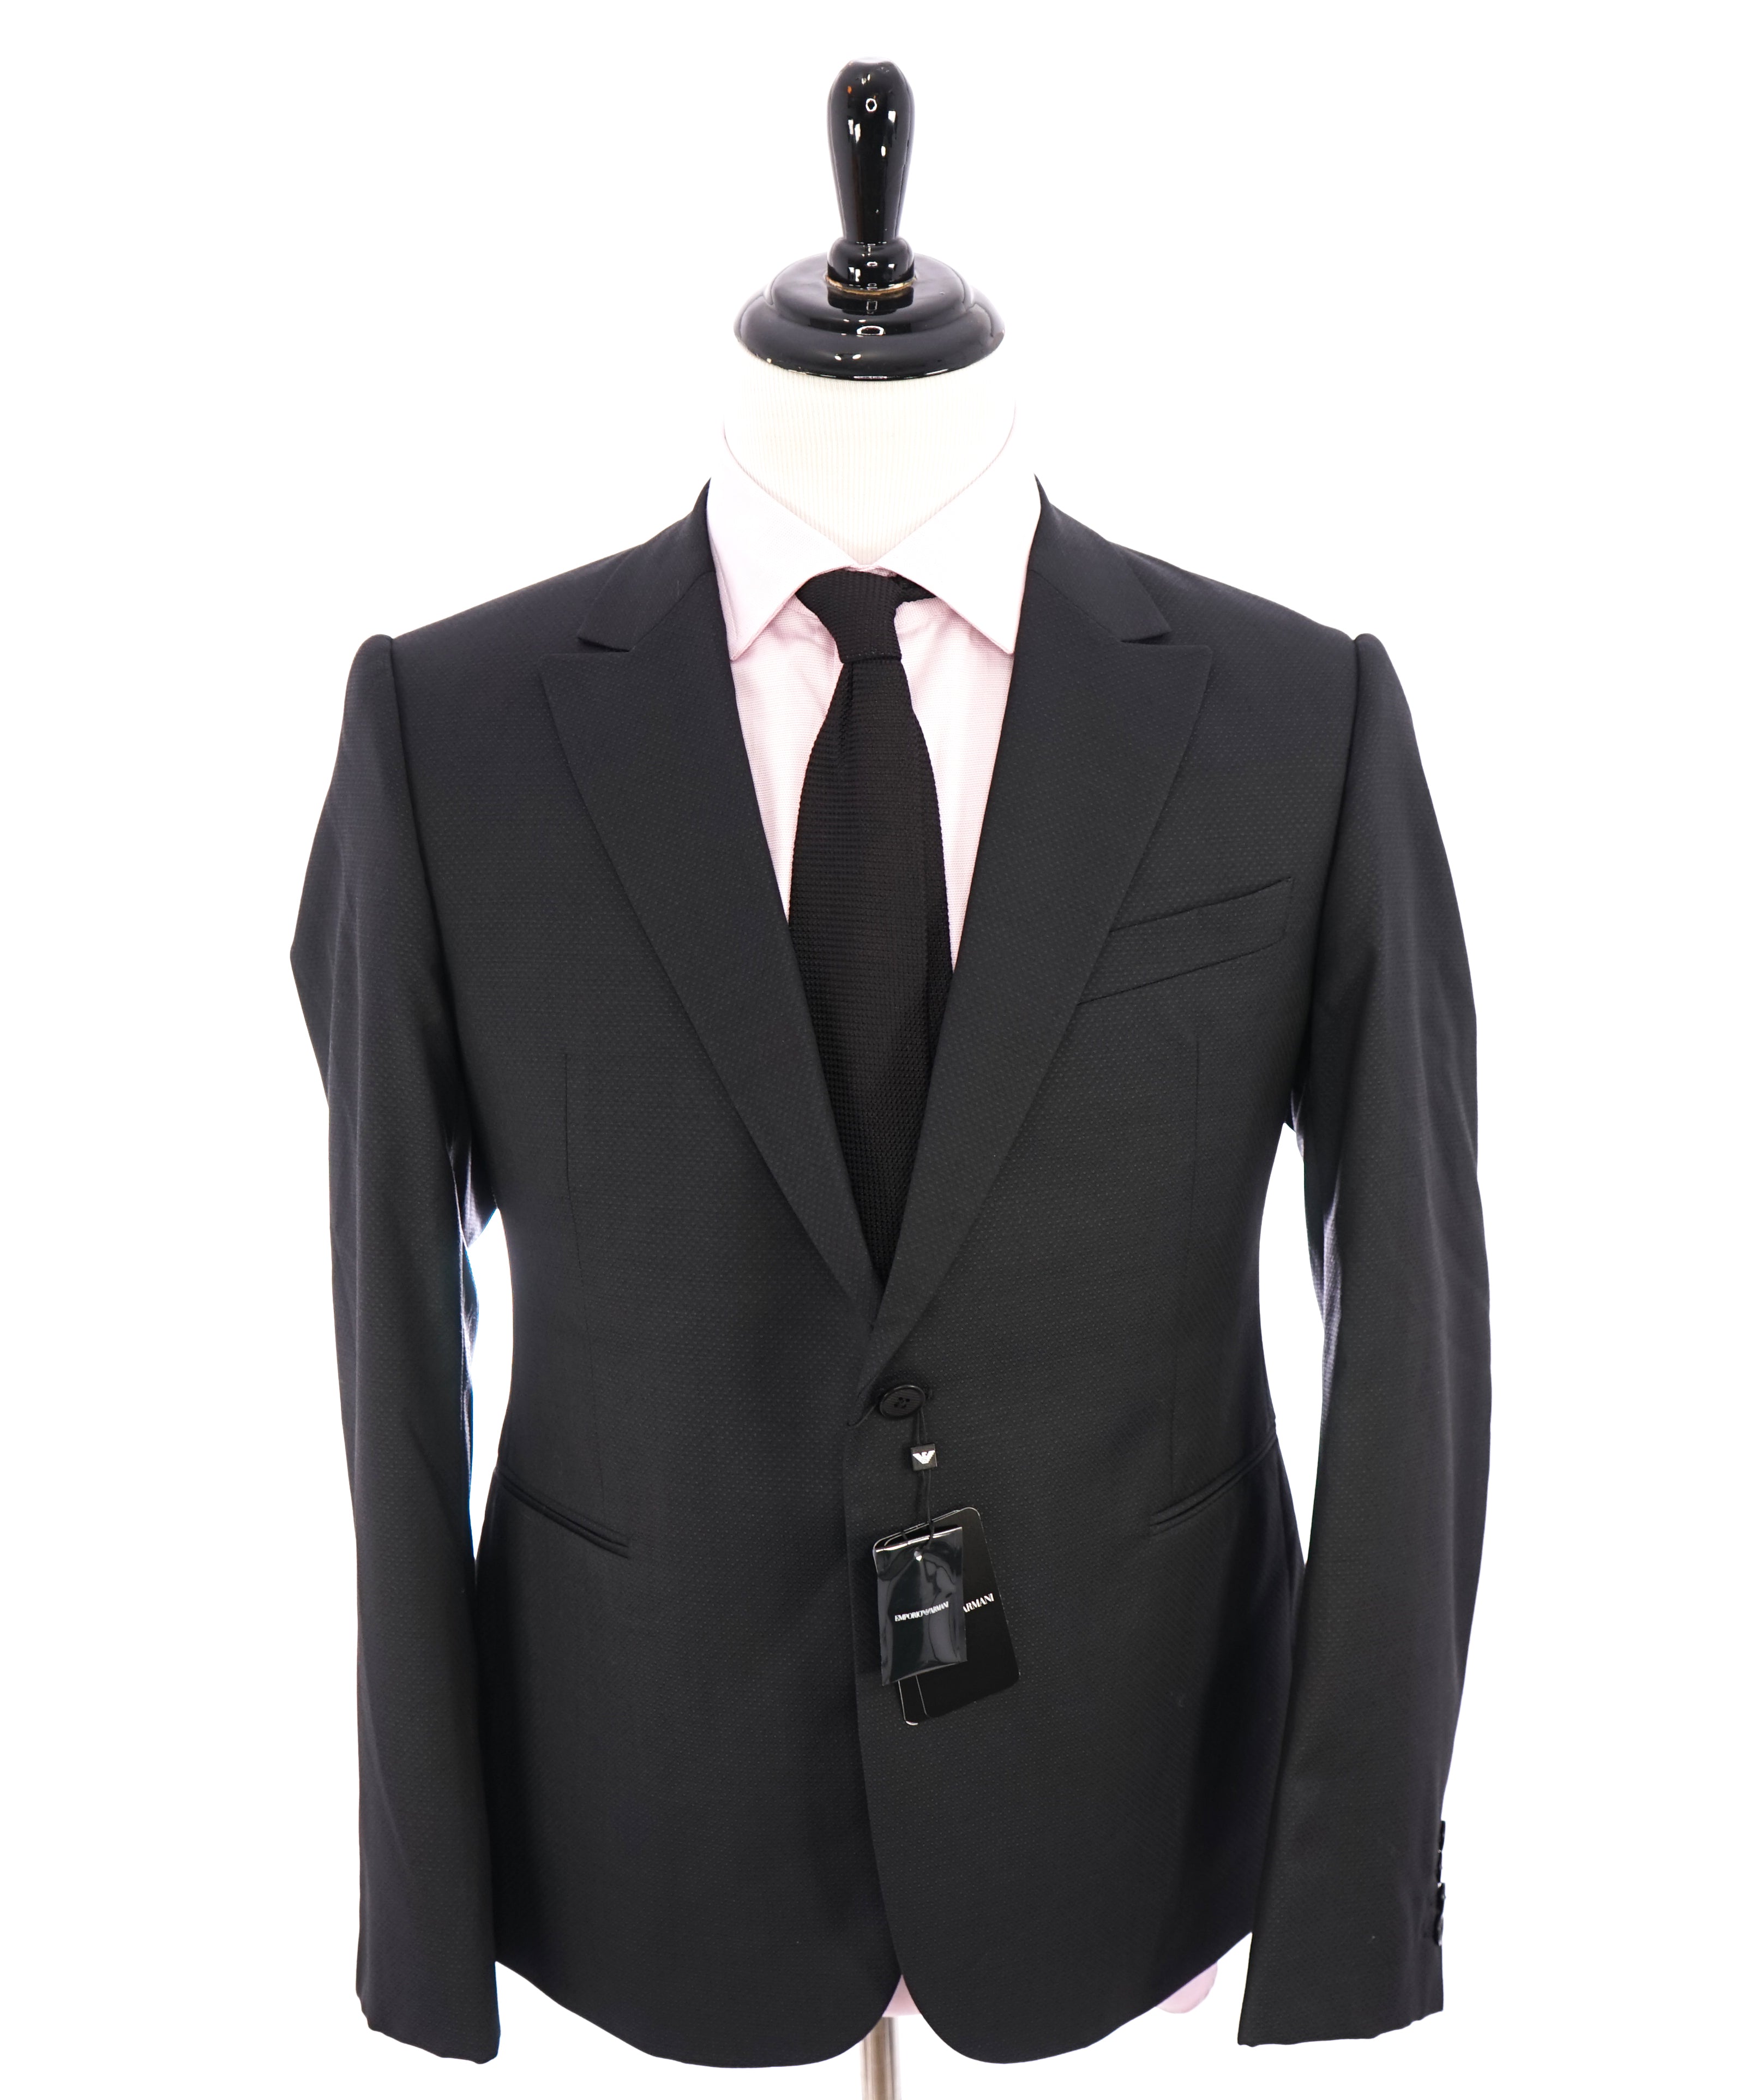 EMPORIO ARMANI - "M LINE" Drop 8 Made In Italy Geometric 1-Button Suit